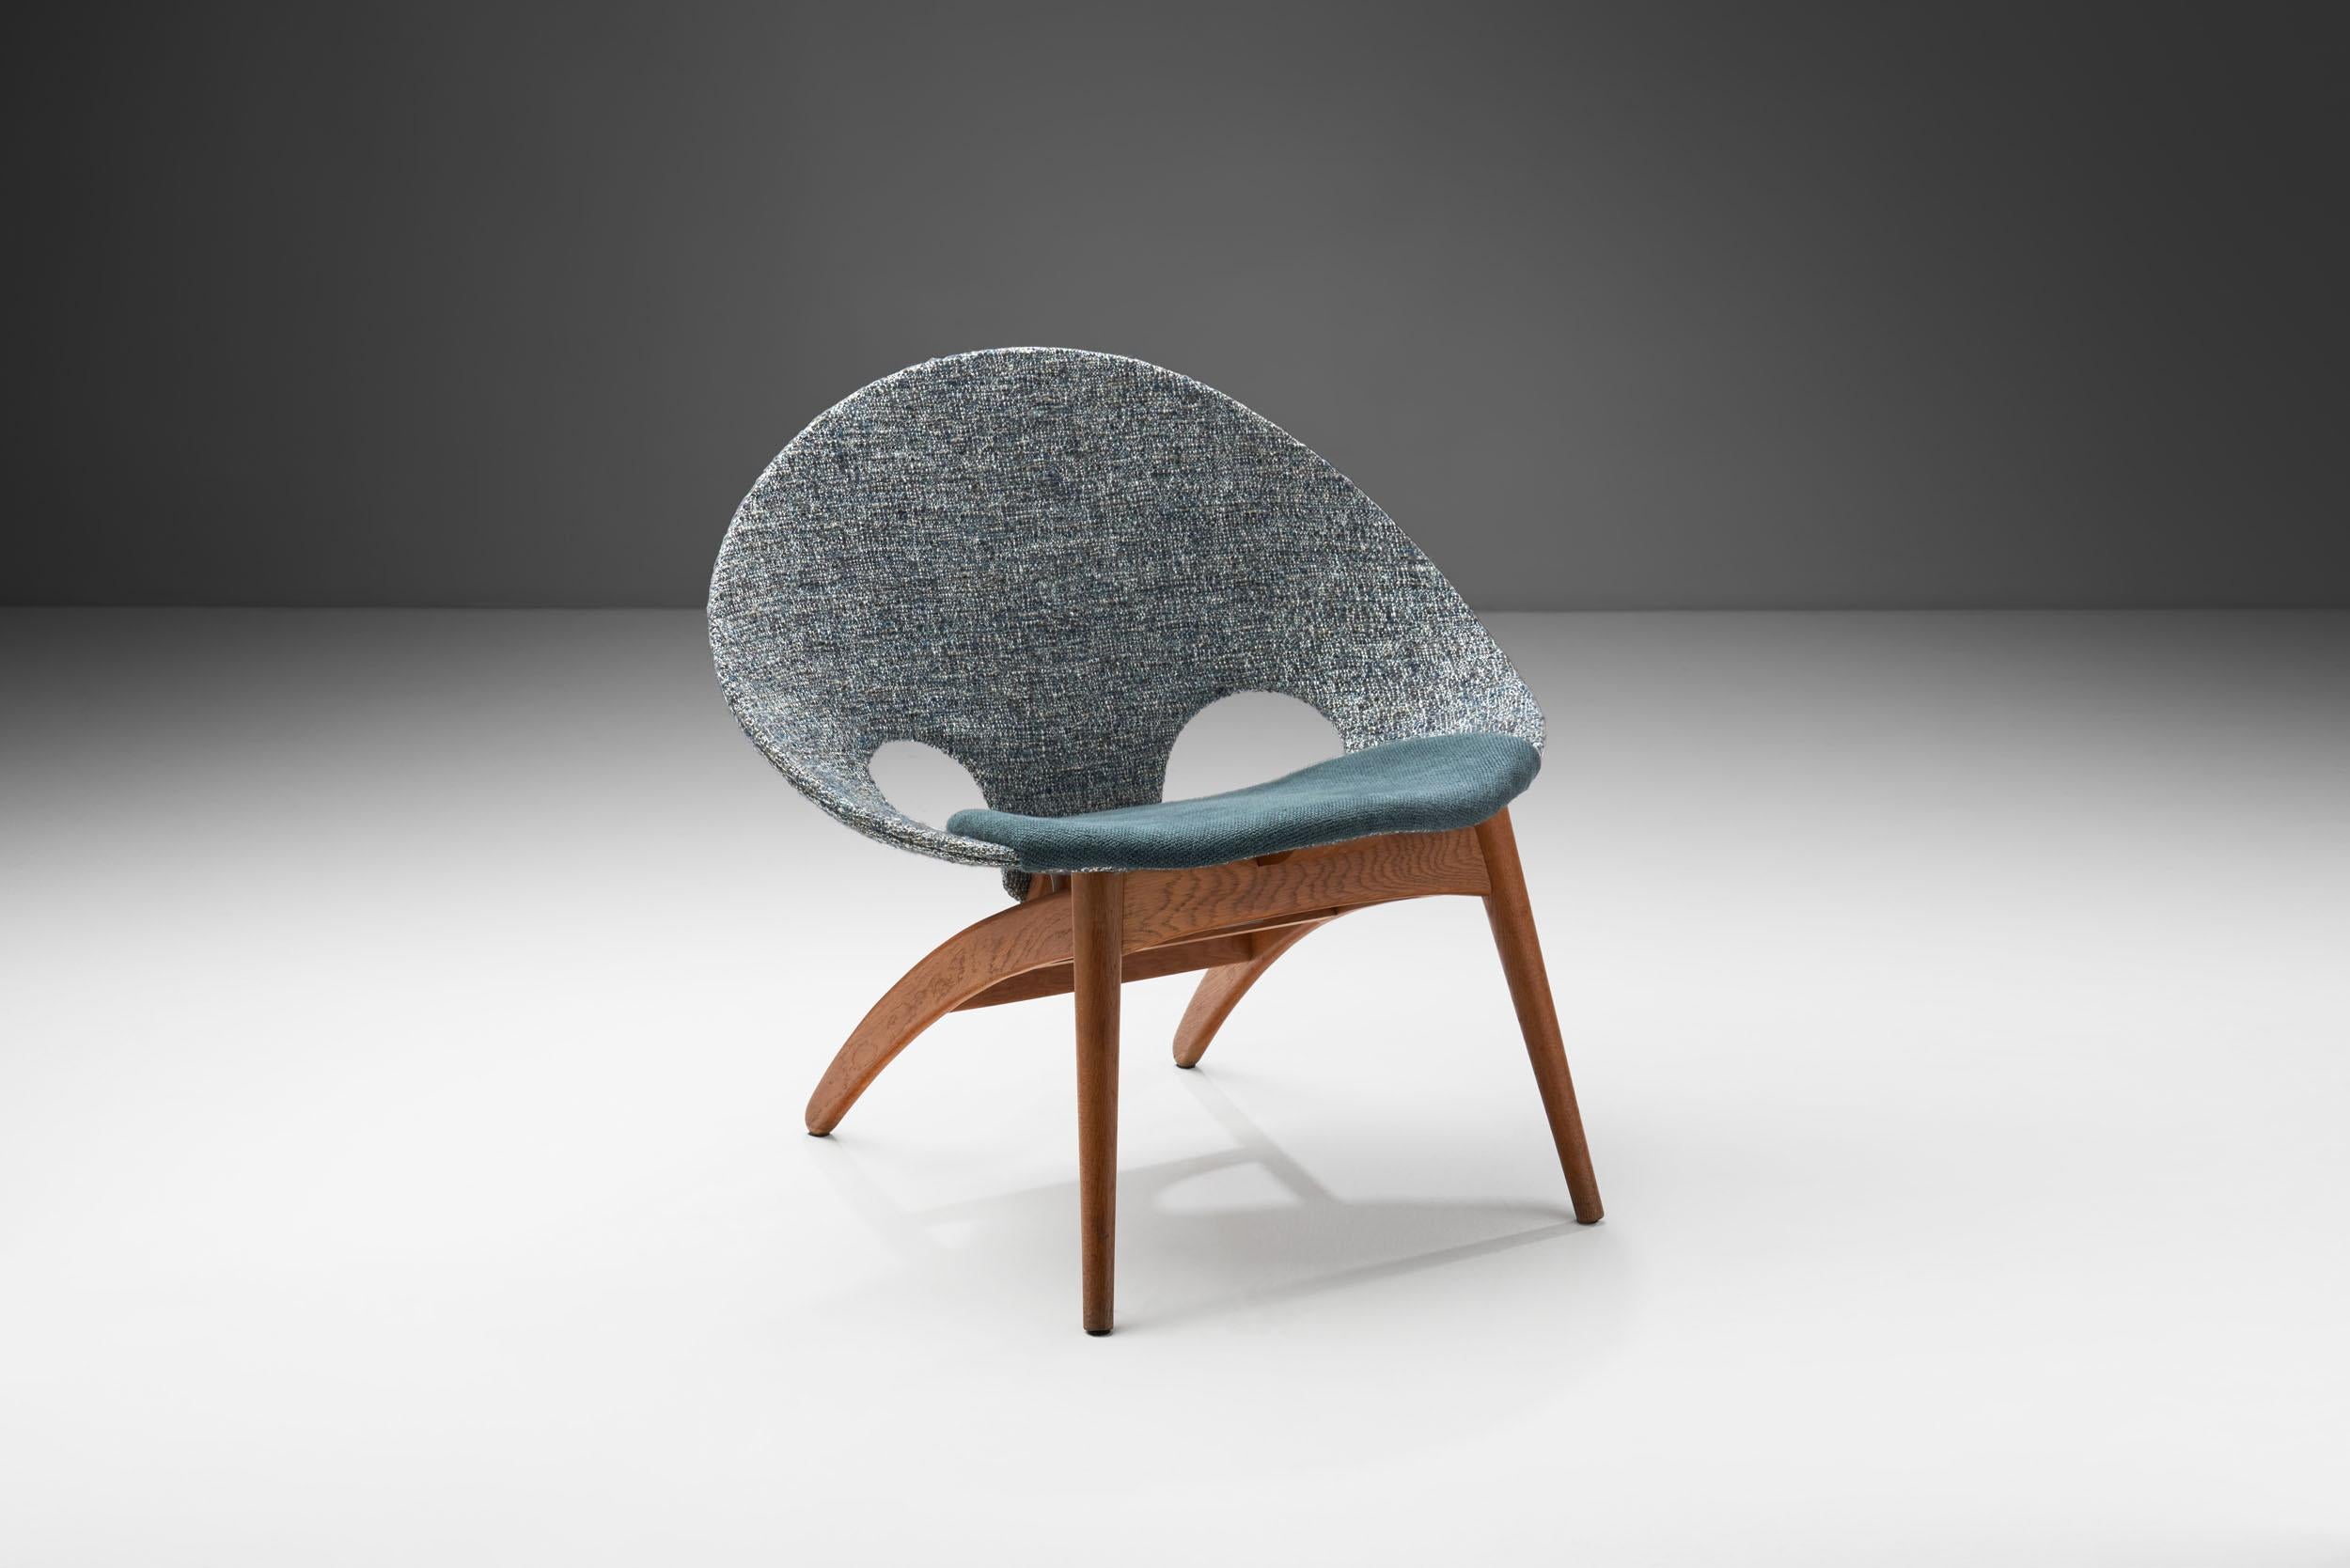 The shape of this “No. 55” shell chair indicates the design of an architect. Indeed, Arne Hovmand-Olsen was a prolific Danish designer and architect, whose designs centered around the traditional values of Scandinavian design: simple and clear